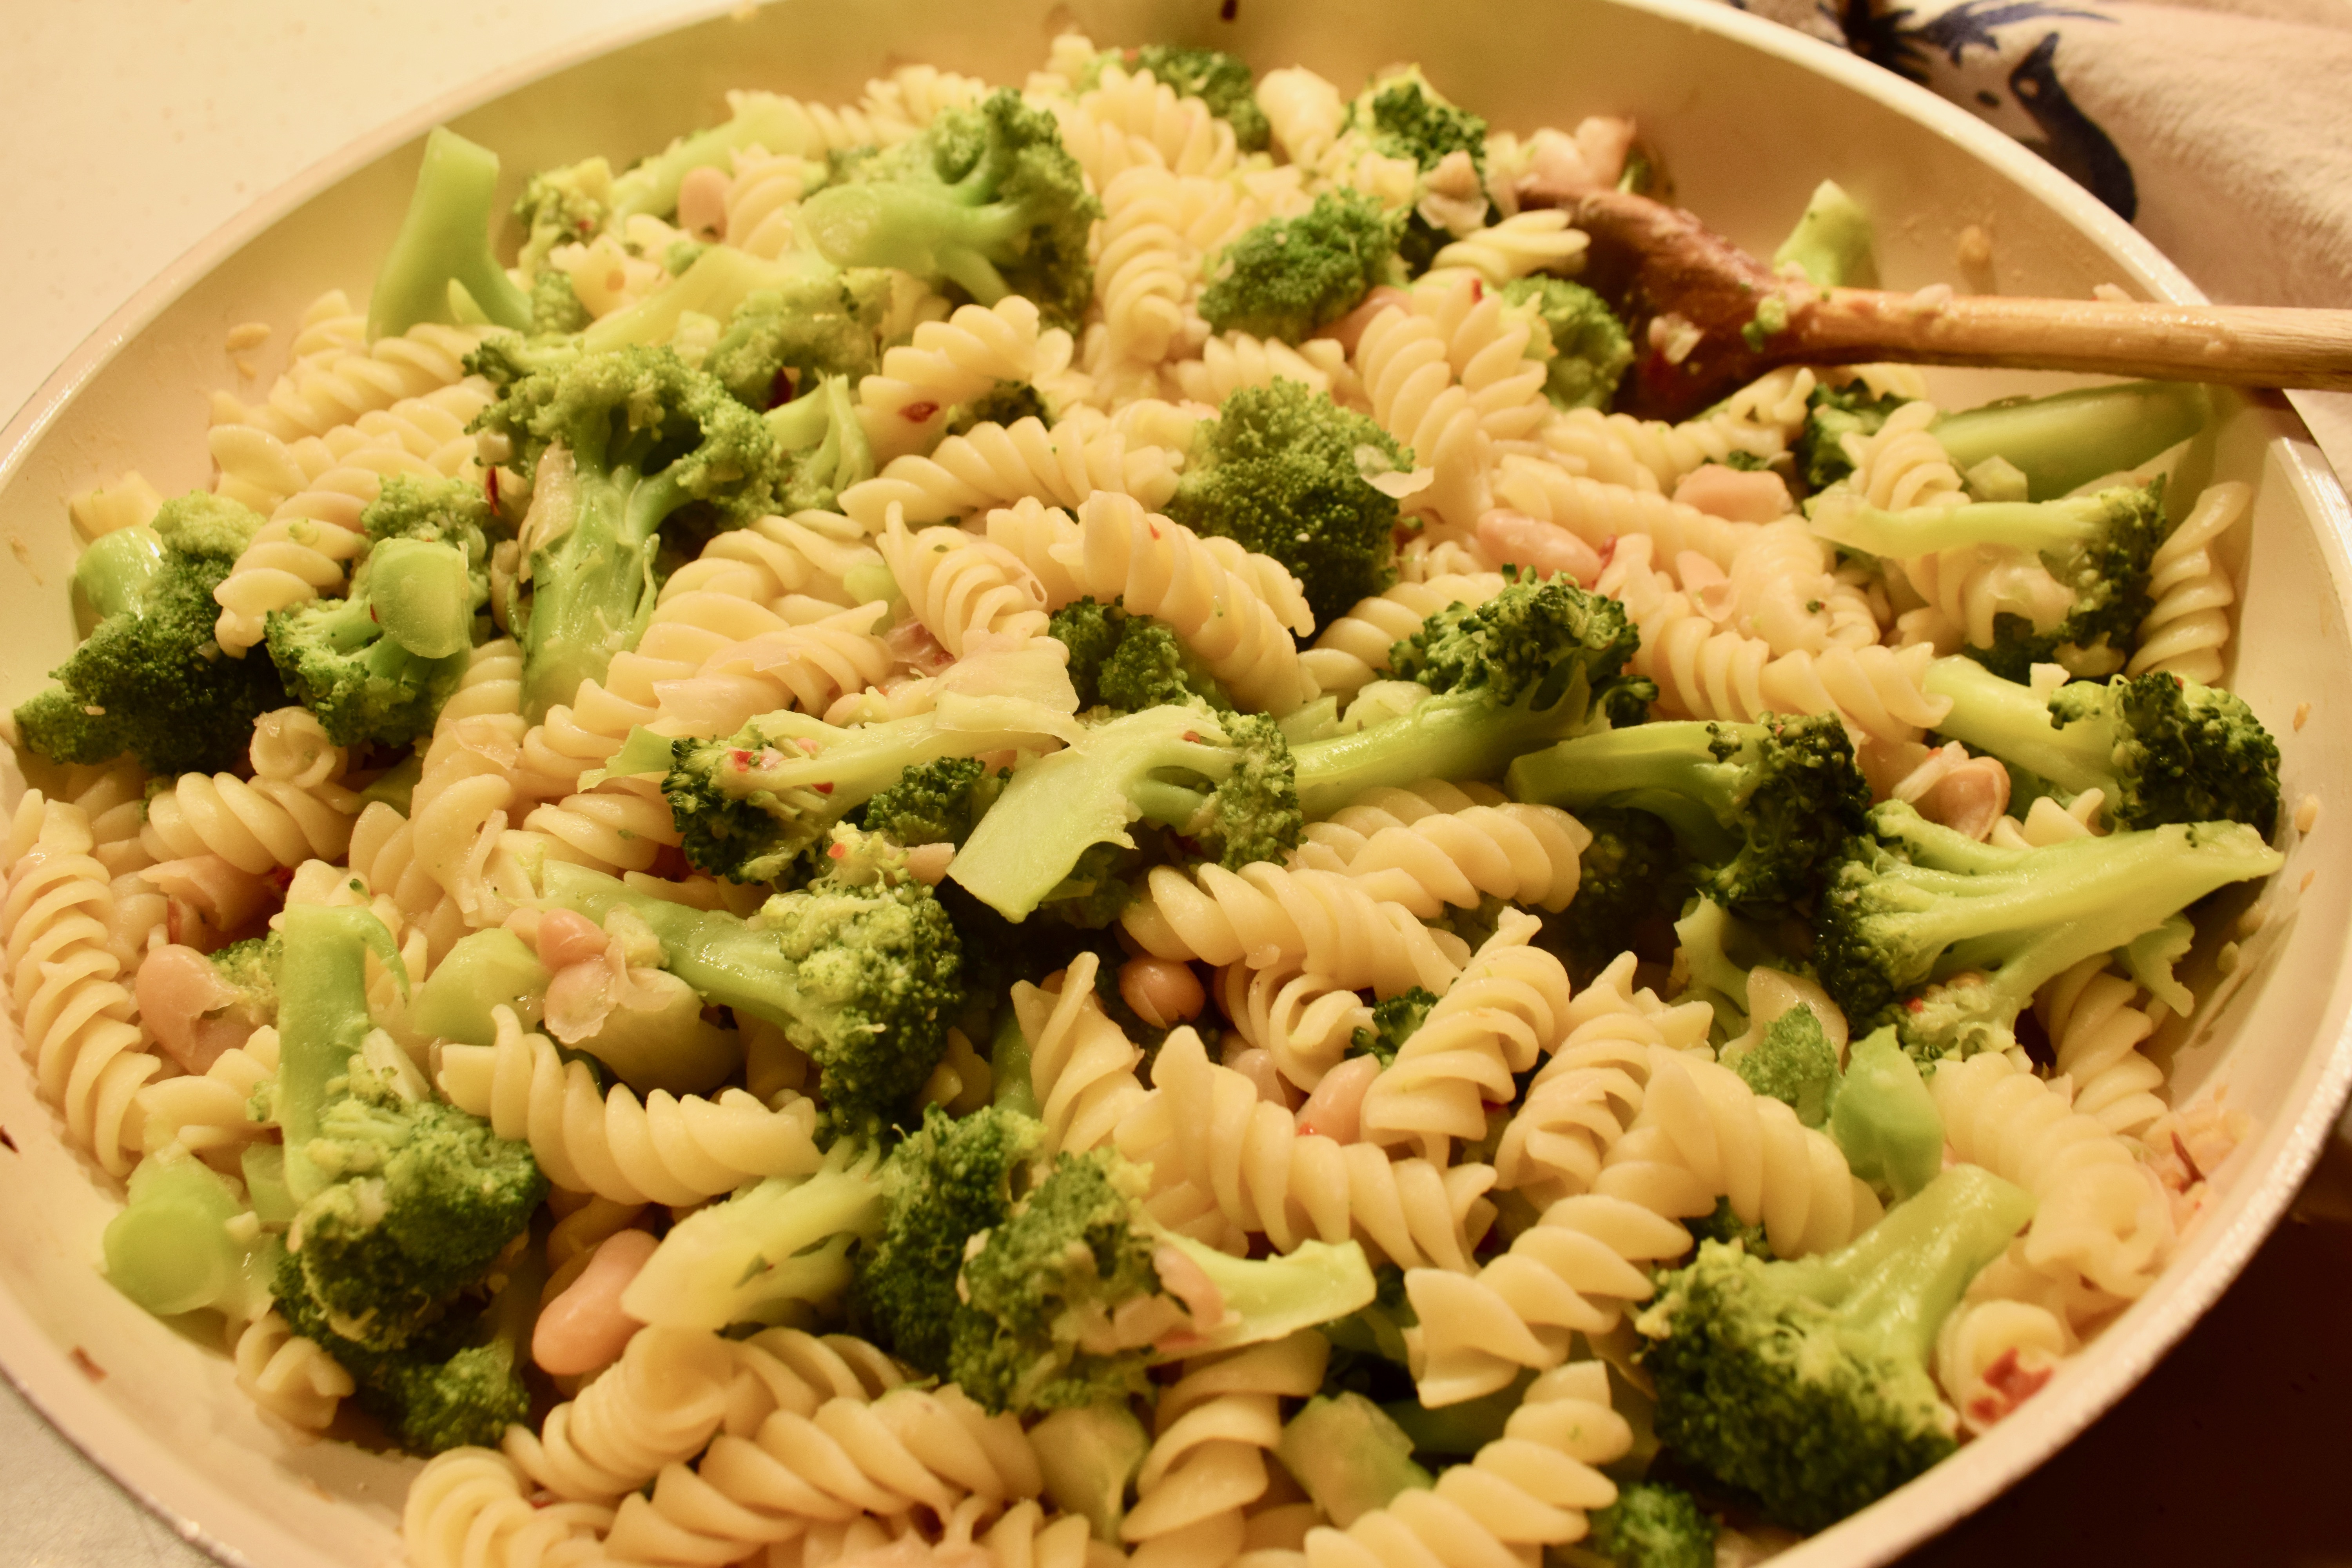 Spicy Broccoli and White Bean Pasta Served in a Large Bowl